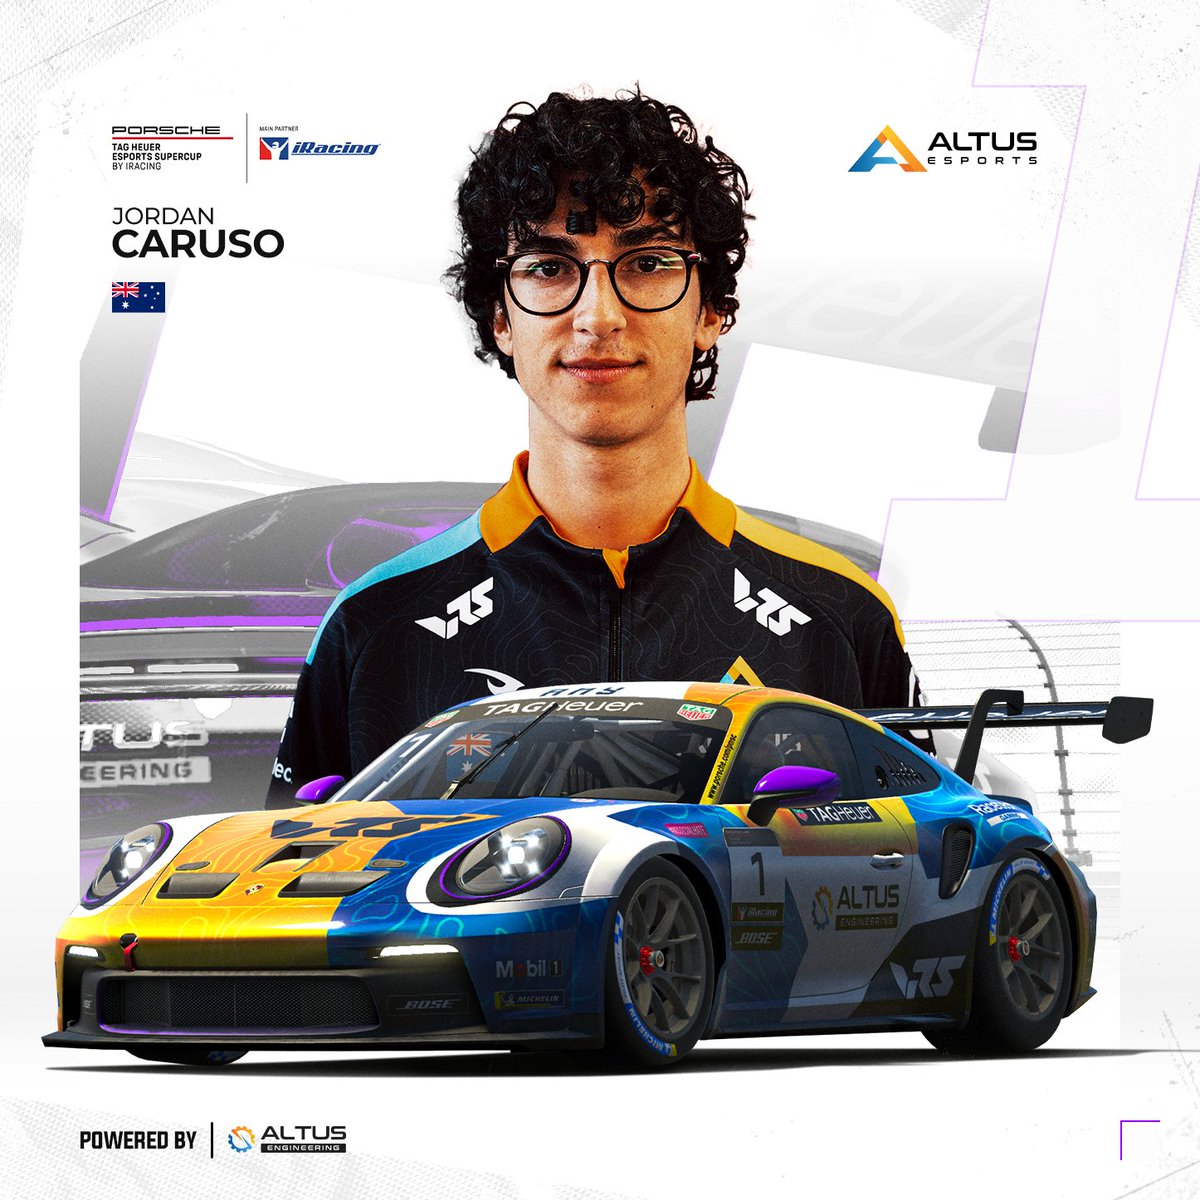 It's time for what everybody wants to win... the Porsche TAG Heuer Esports Supercup! Defending Champion @JCaruso012 looks to go back to back and leave no stone unturned. #WeAreAltus #LetsDoItAgain @PorscheRaces @iRacing